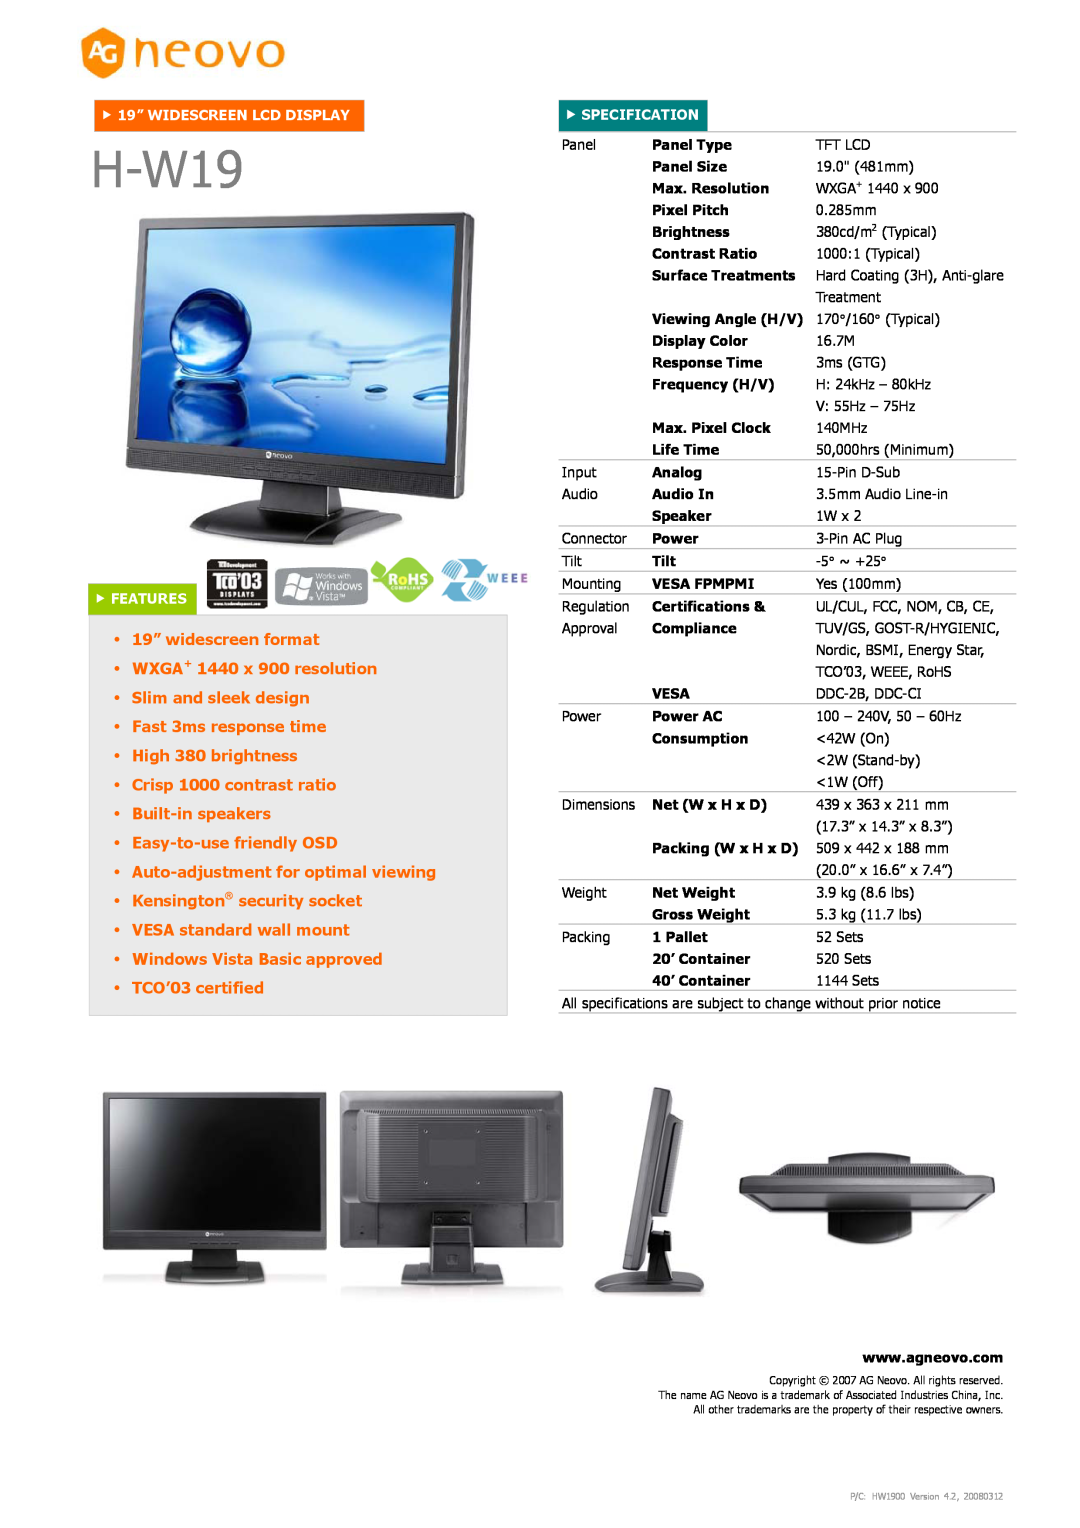 AG Neovo H-W19 dimensions Auto-adjustment for optimal viewing Kensington security socket, f 19” WIDESCREEN LCD DISPLAY 